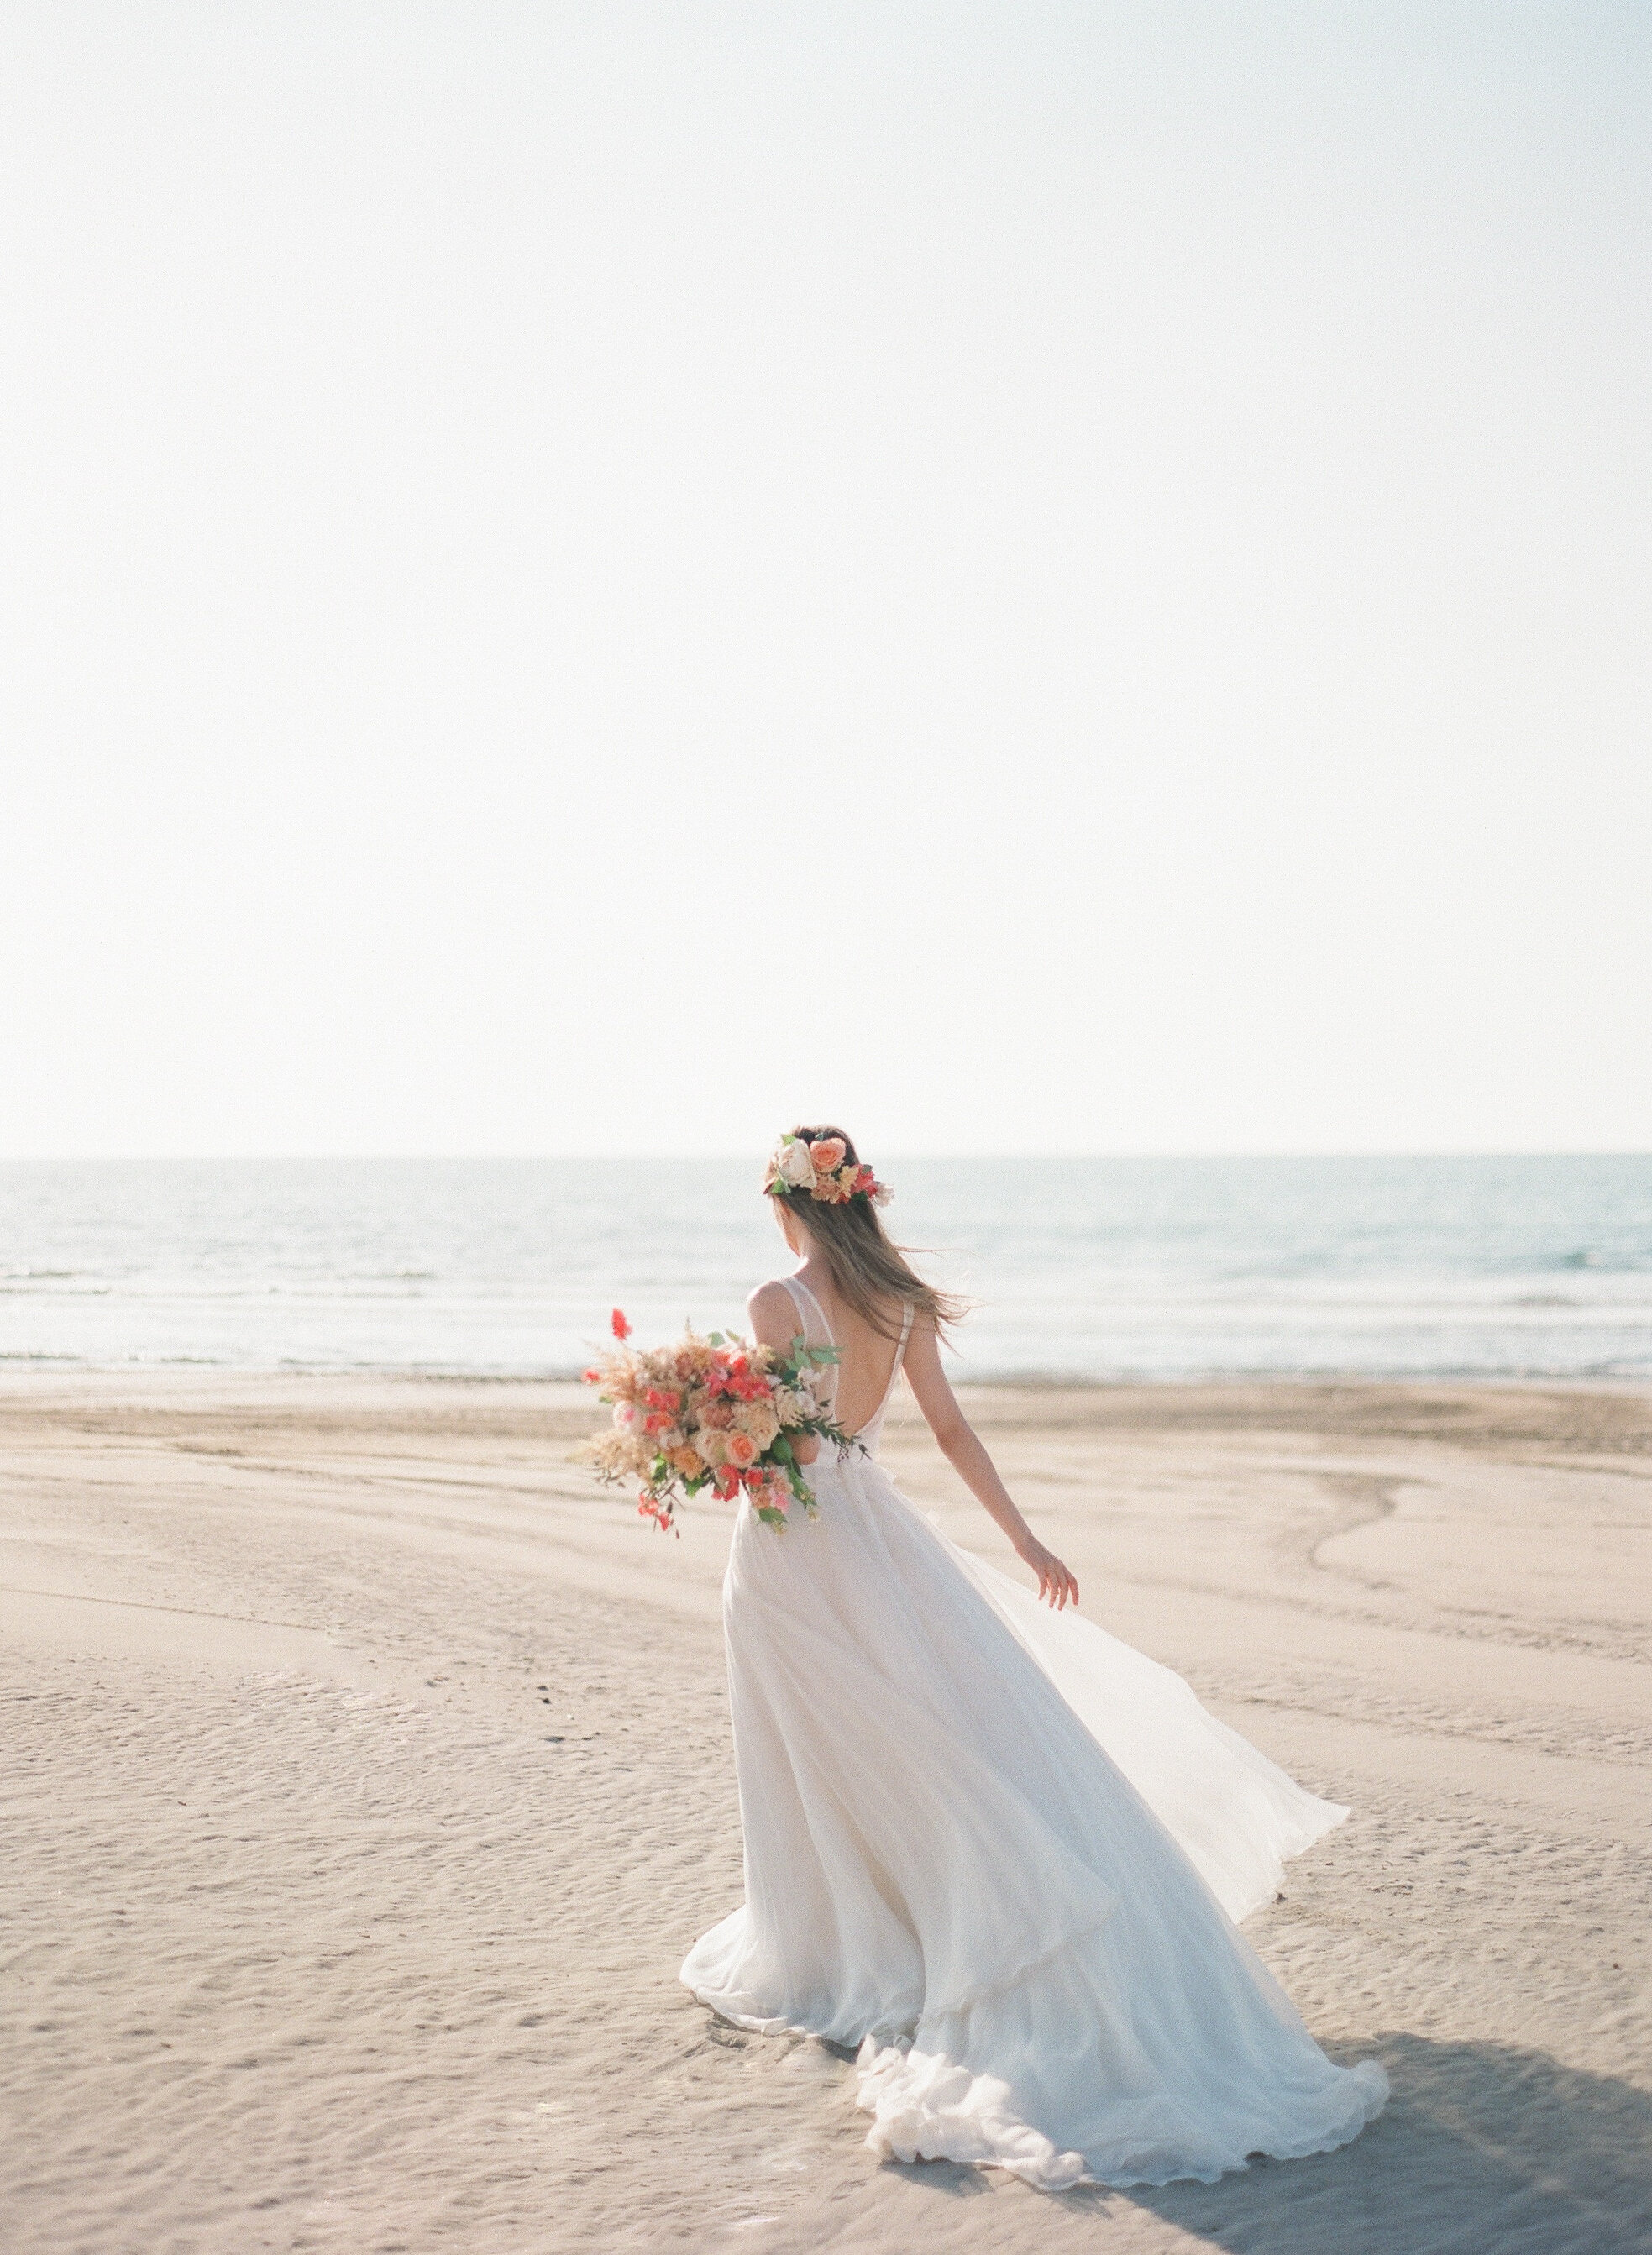 Delicate Bridal Session on the beach of Venice - Maddy Christina (37 sur 80).jpg